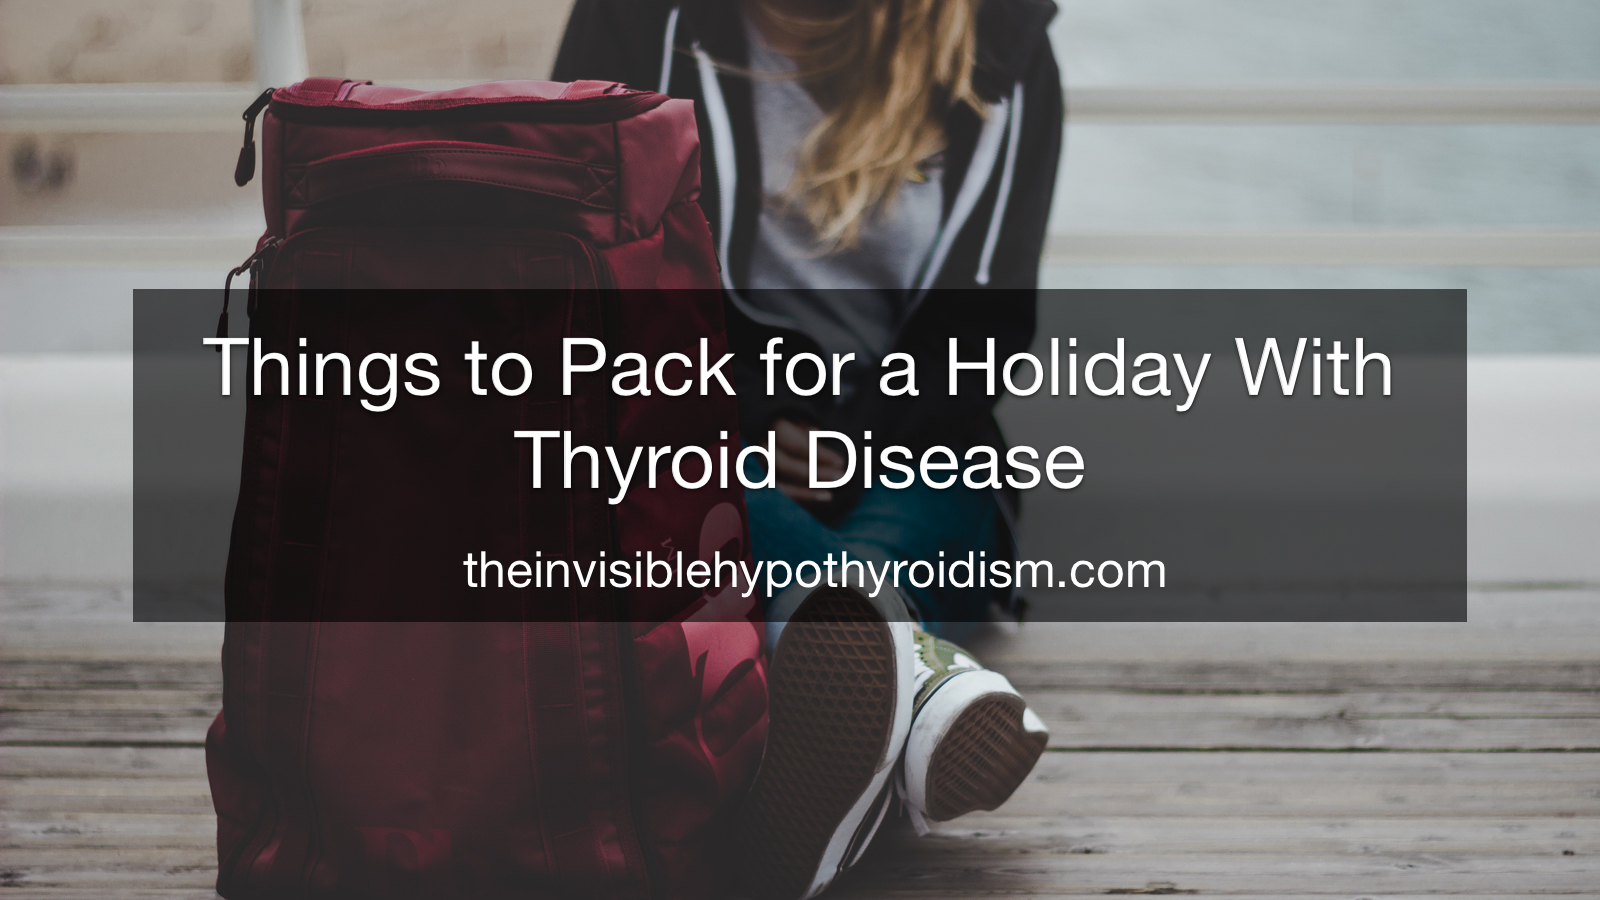 Things to Pack for a Holiday With Thyroid Disease